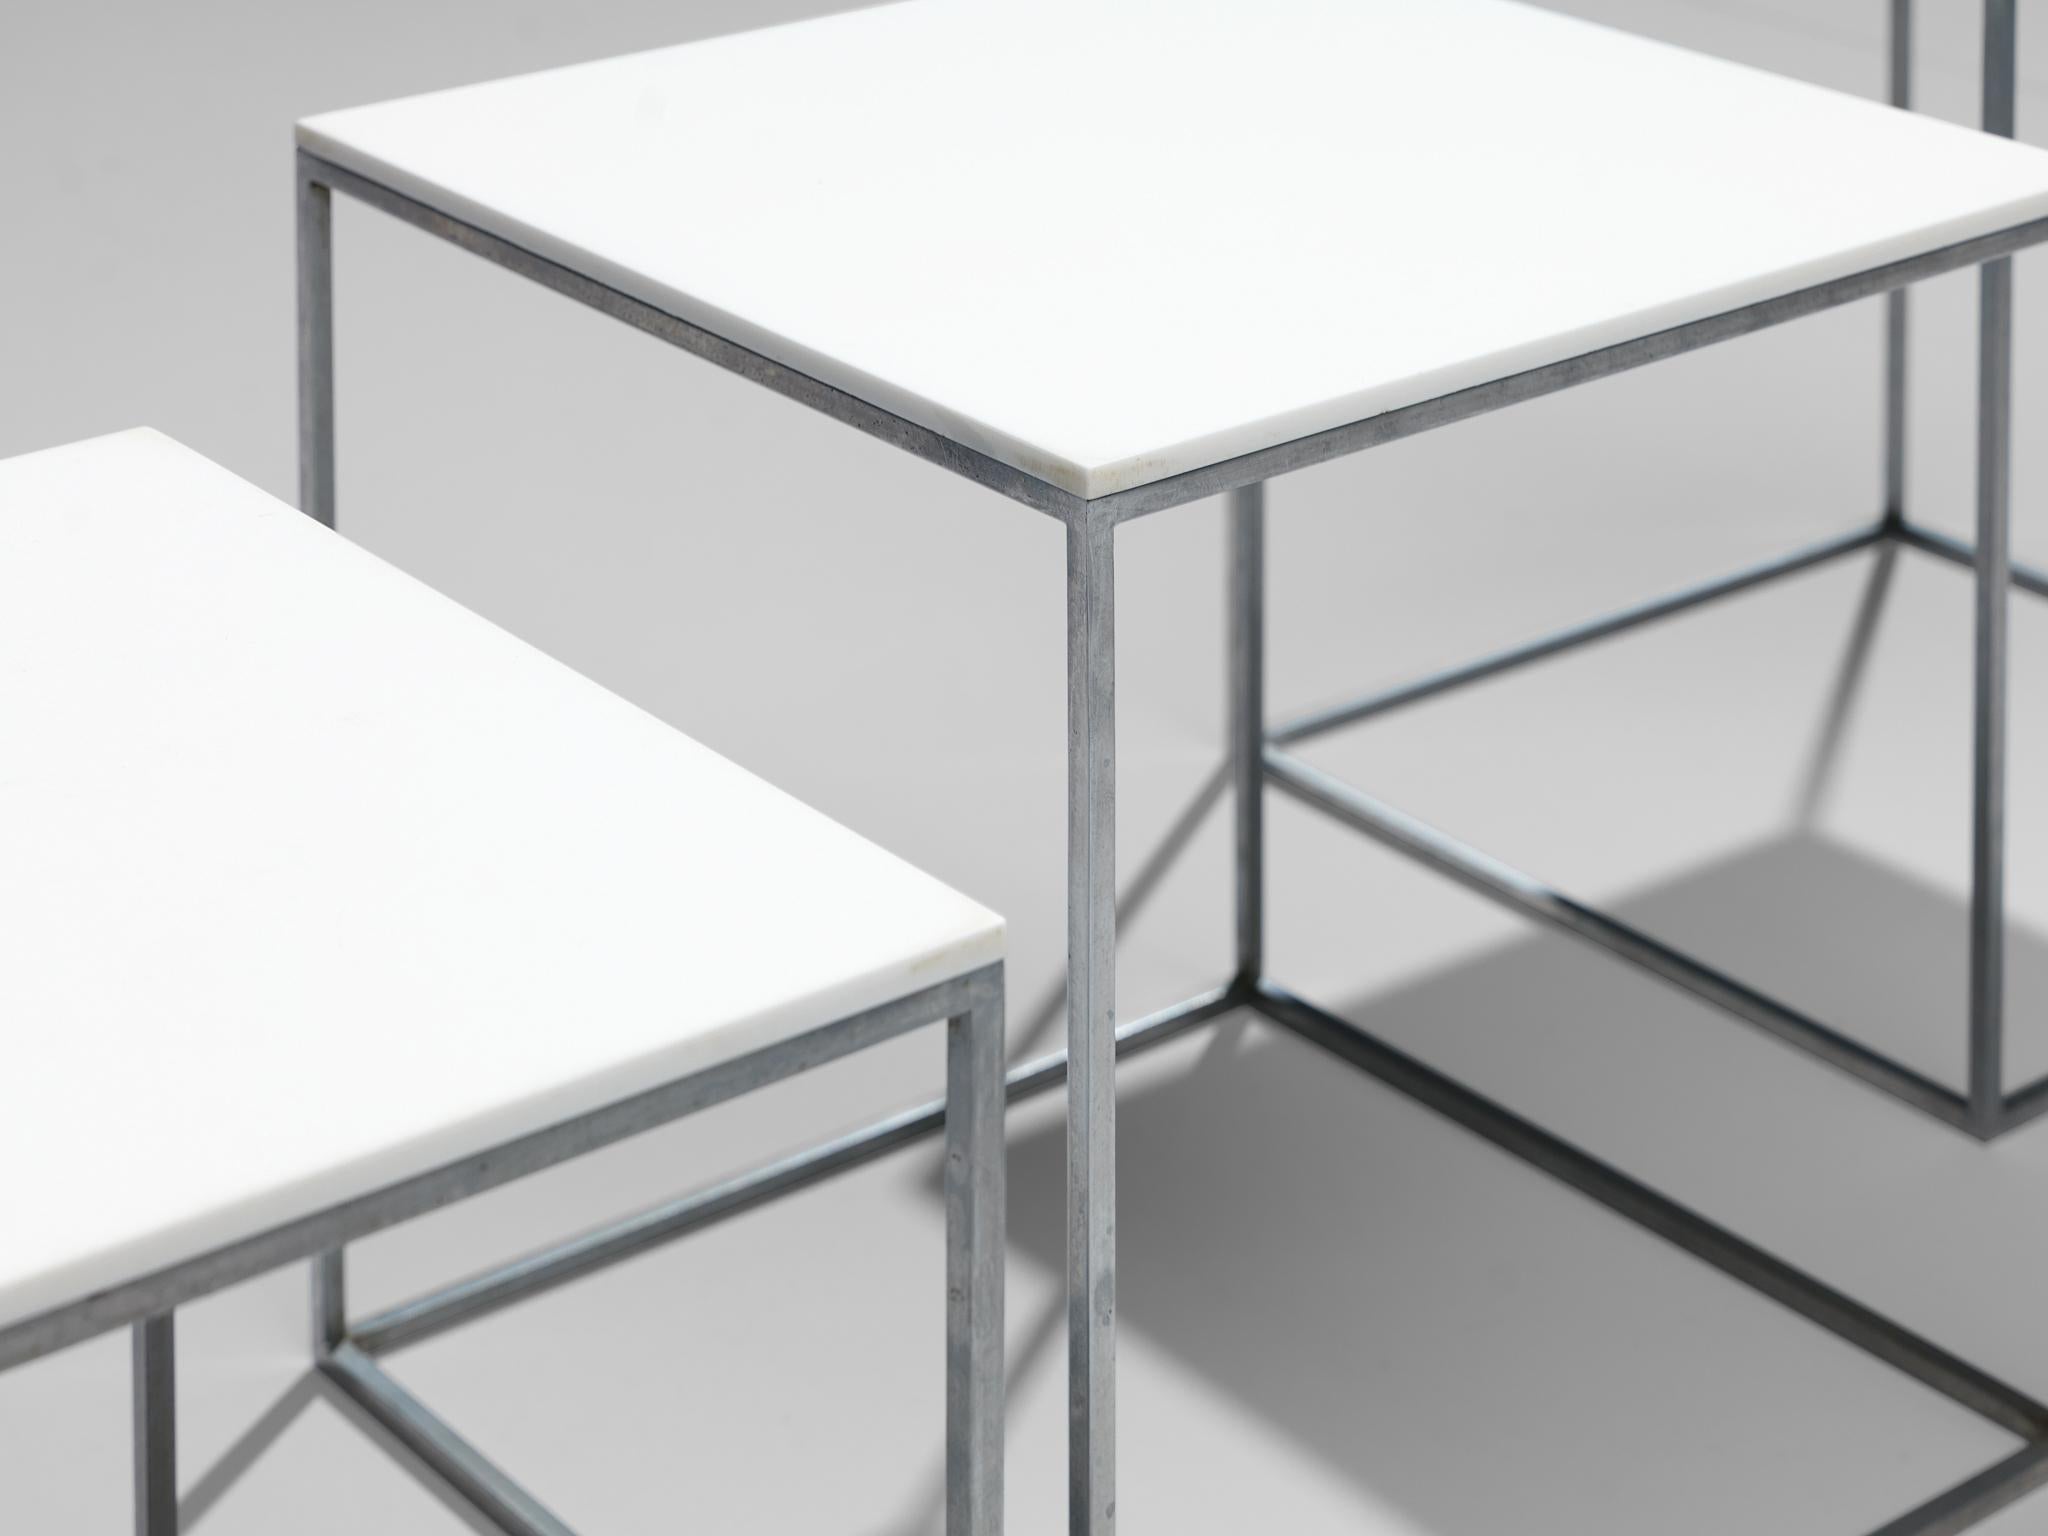 Mid-20th Century Poul Kjaerholm Set of Nesting Tables in White Perspex and Steel  For Sale